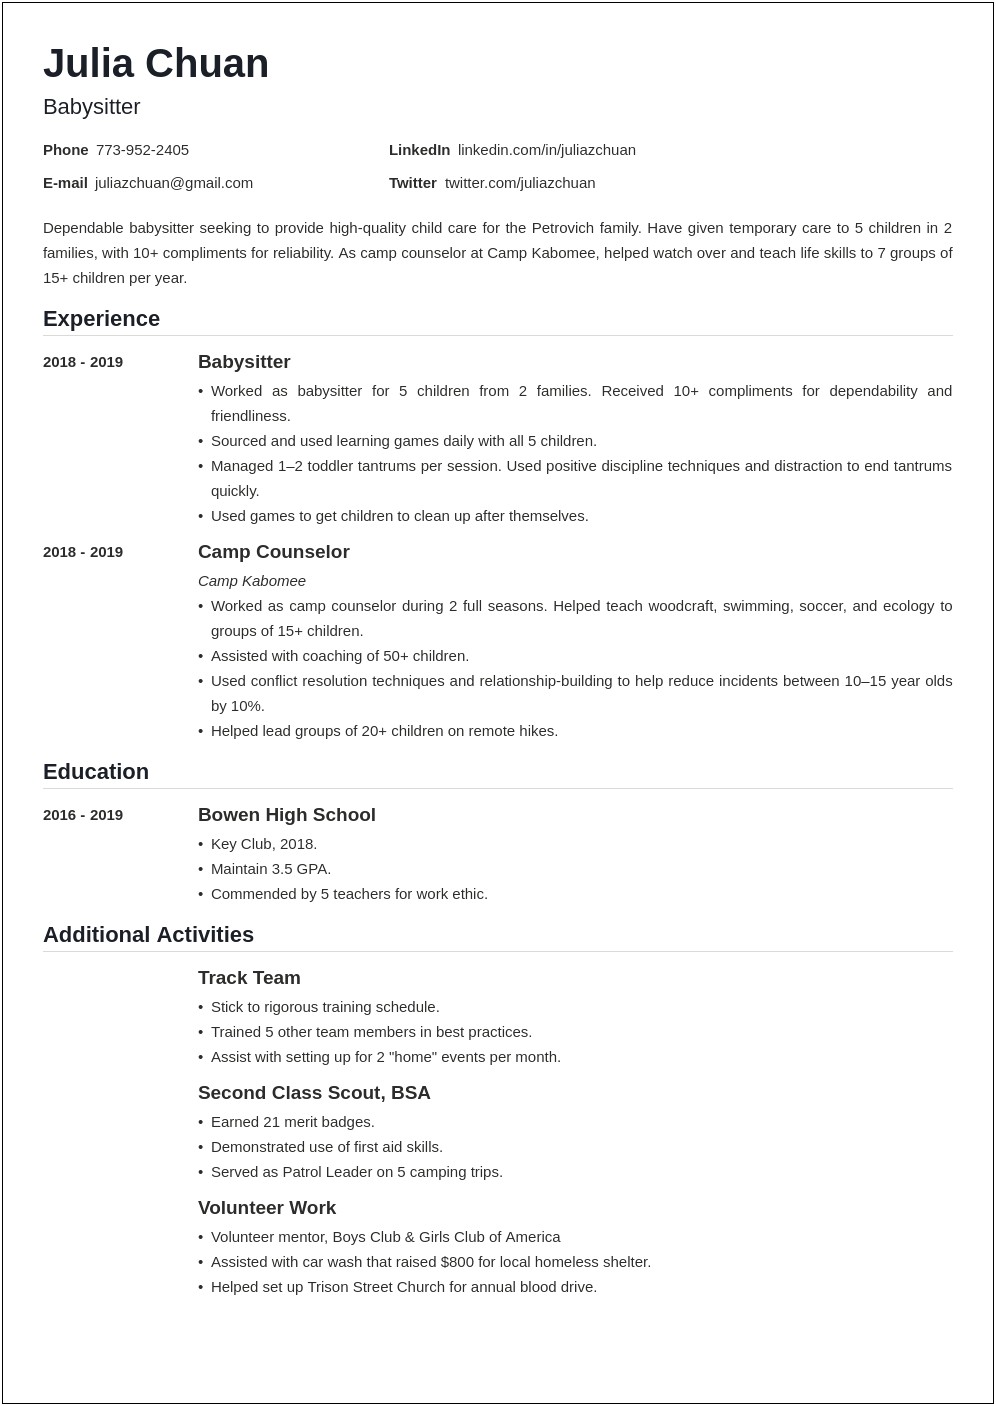 Can You Put Future Volunteer Experience On Resume